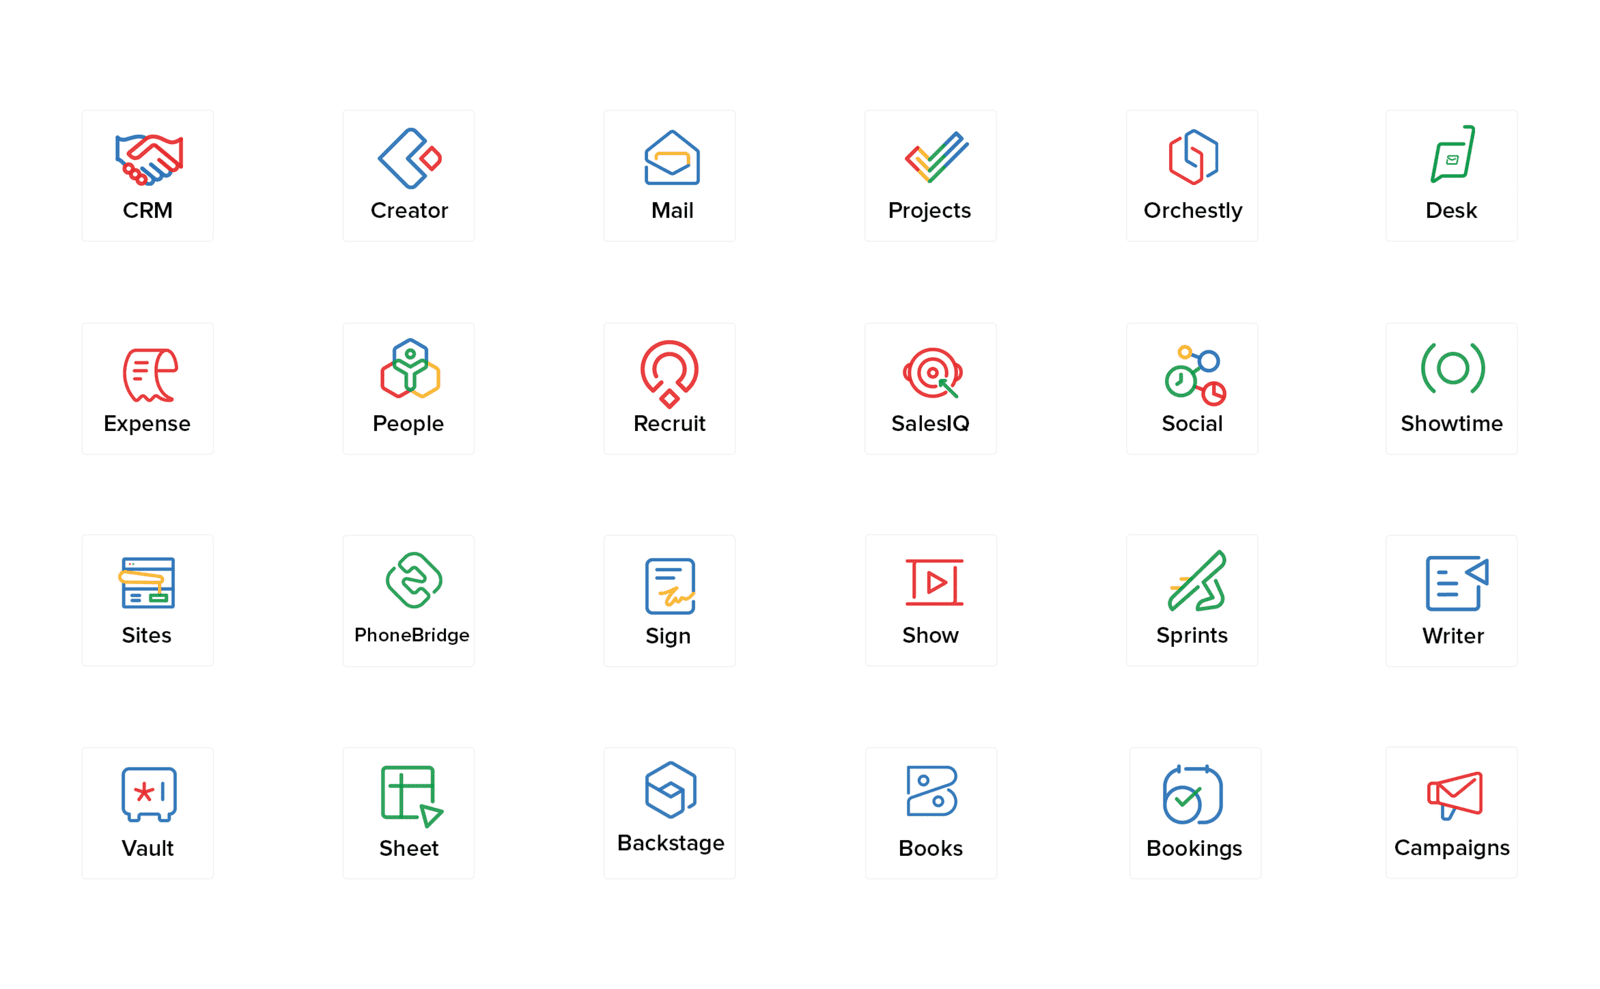 Zoho One. One Comprehnsive platform of over 45 applicayions including CRM, Marketing, Collaboration, Customer Service, Analytics.